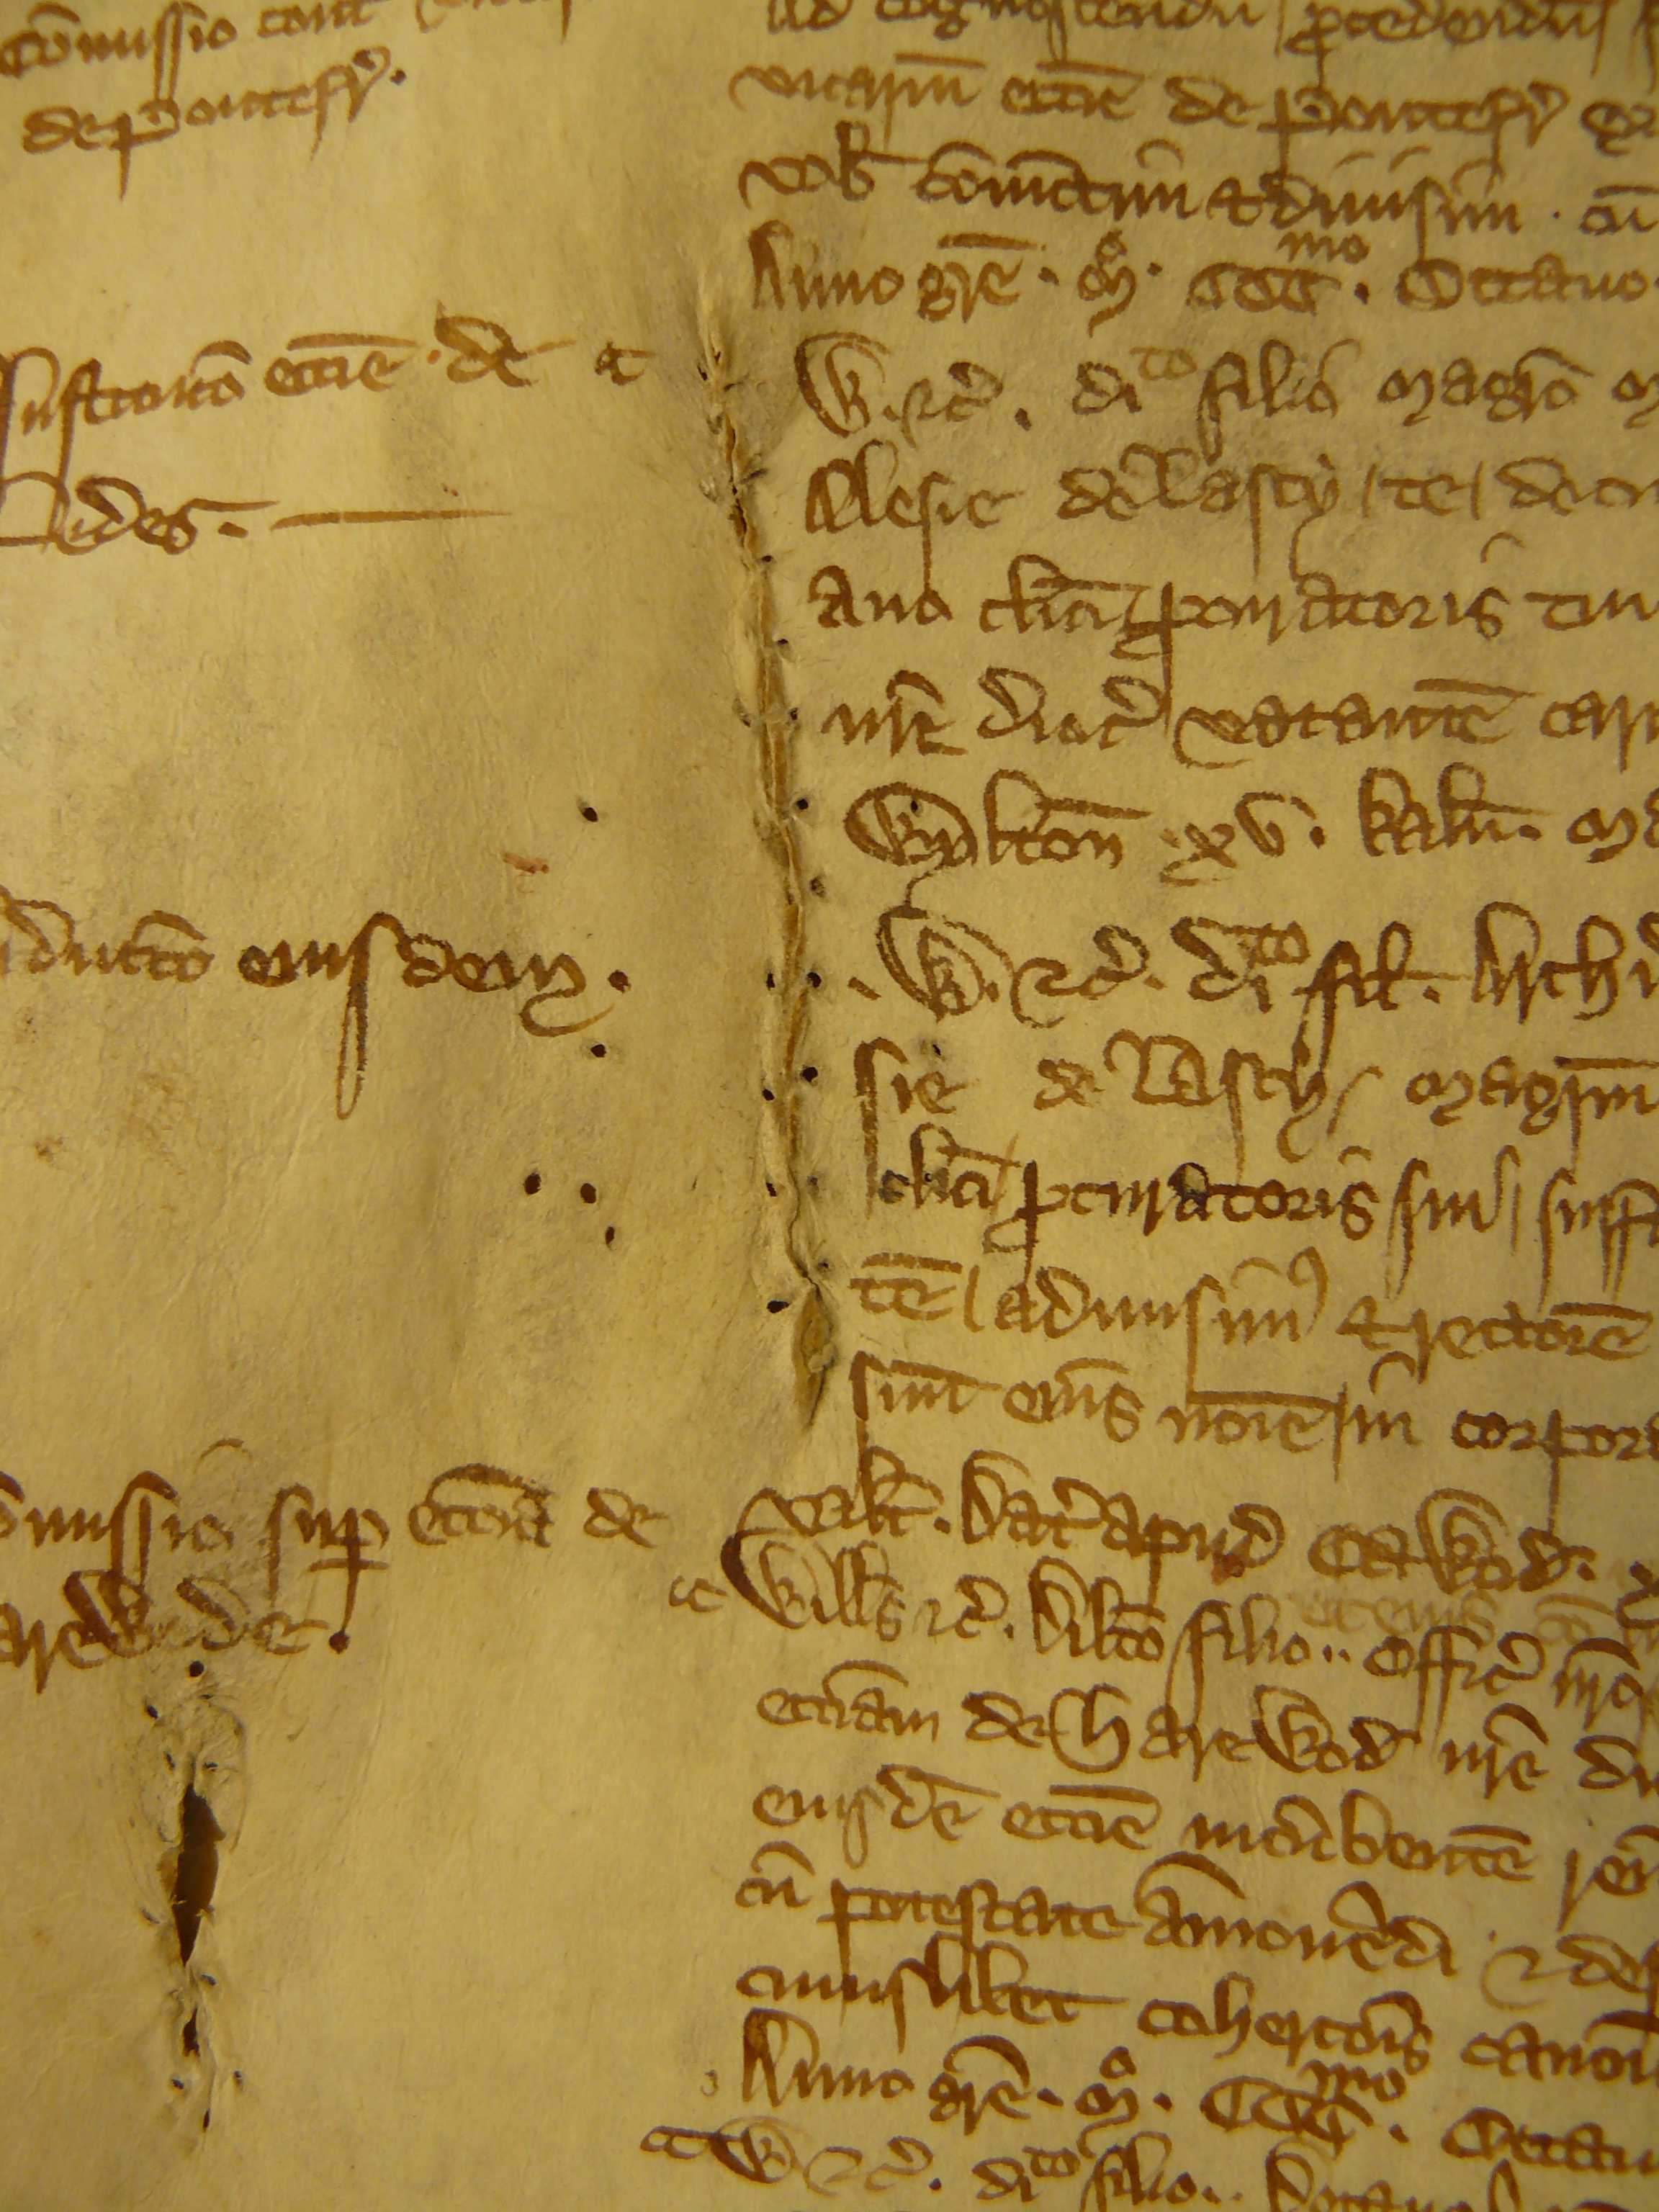 Image: Sewn repair in Archbishop's Register 7 Greenfield, 1306 - 1311 (By permission of The Borthwick Institute for Archives)